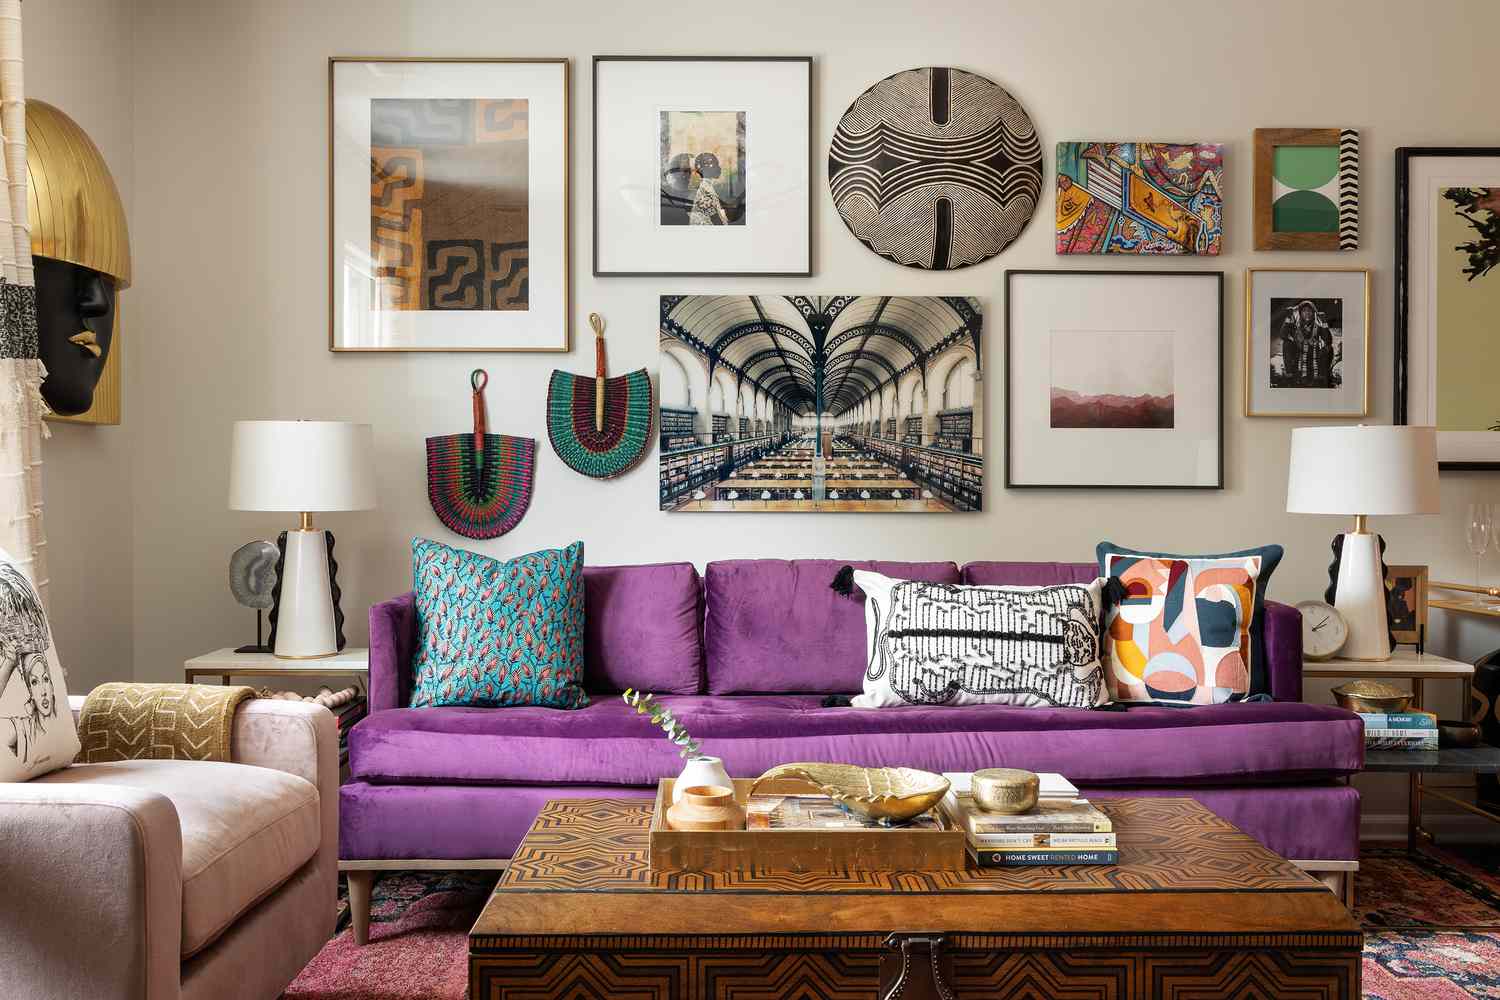  Beth Diana Smith's Irvington, NJ living room features a purple sofa in her eclectic maximalist style